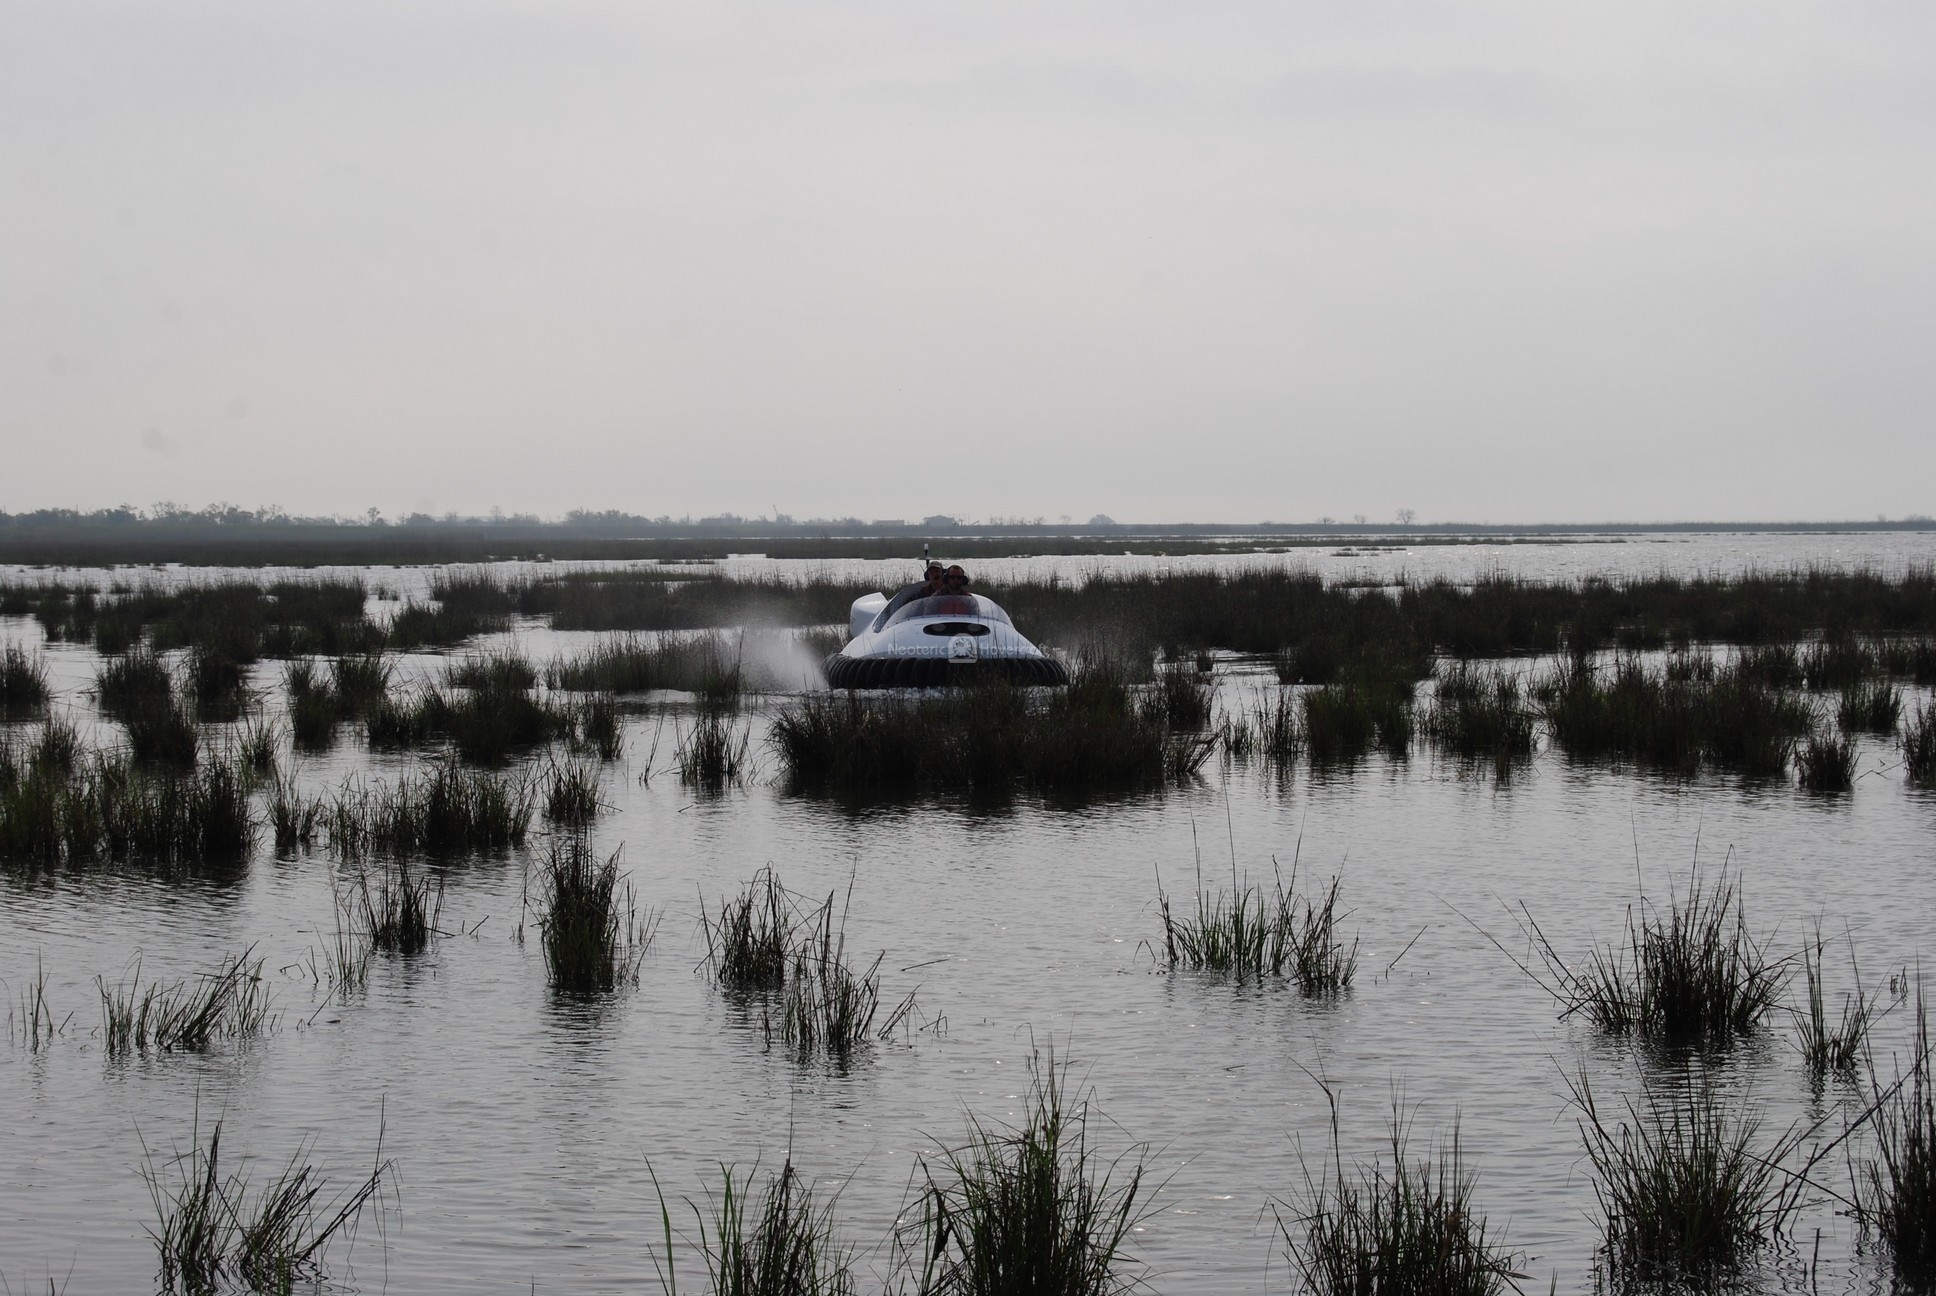 Neoteric Commercial Hovercraft training in tall grass marsh